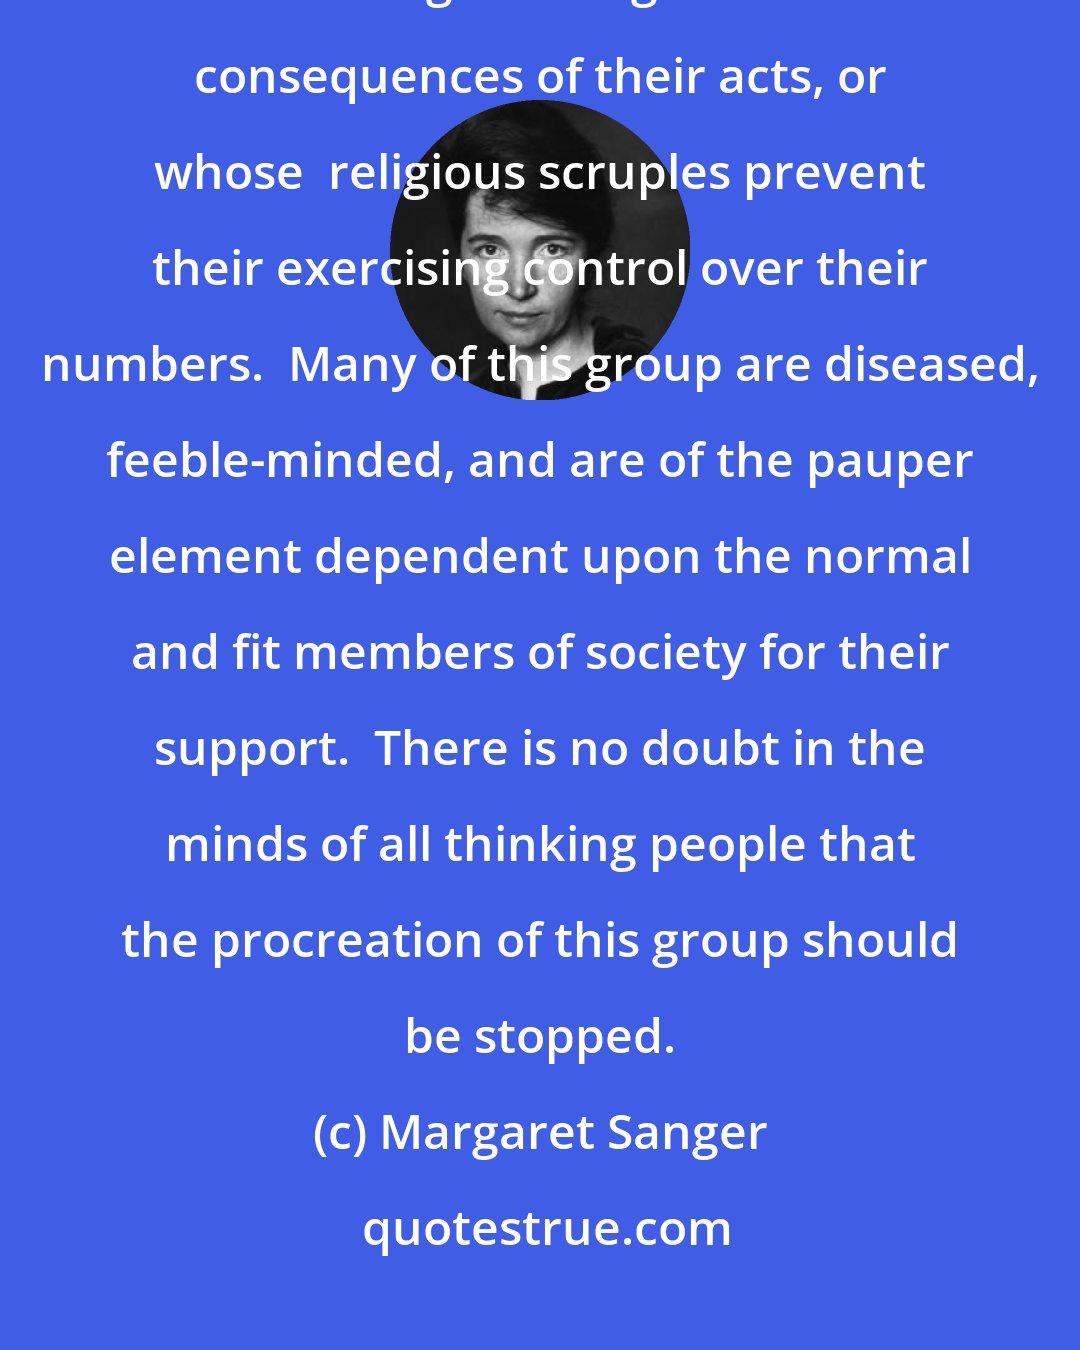 Margaret Sanger: The third group [of society] are those irresponsible and reckless ones having little regard for the consequences of their acts, or whose  religious scruples prevent their exercising control over their numbers.  Many of this group are diseased, feeble-minded, and are of the pauper element dependent upon the normal and fit members of society for their support.  There is no doubt in the minds of all thinking people that the procreation of this group should be stopped.